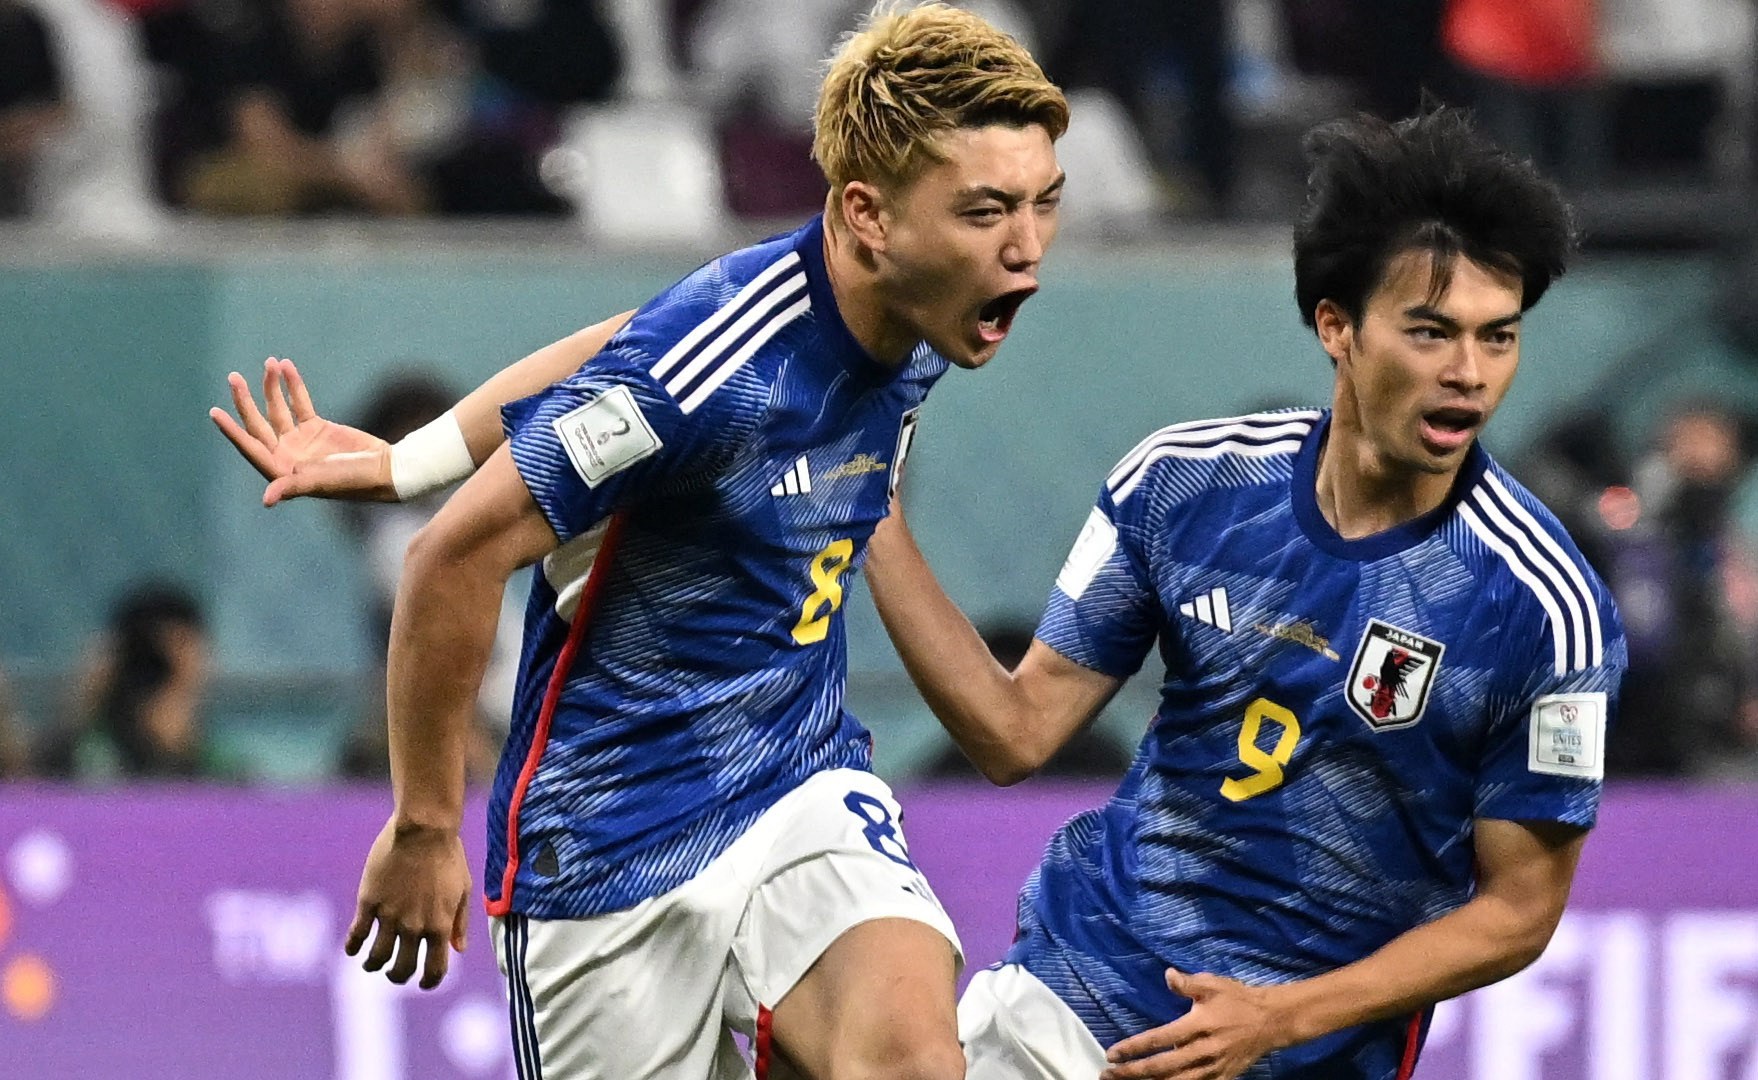 Japan stun Spain 2-1 to book place in World Cup last 16 | Qatar World Cup 2022 News